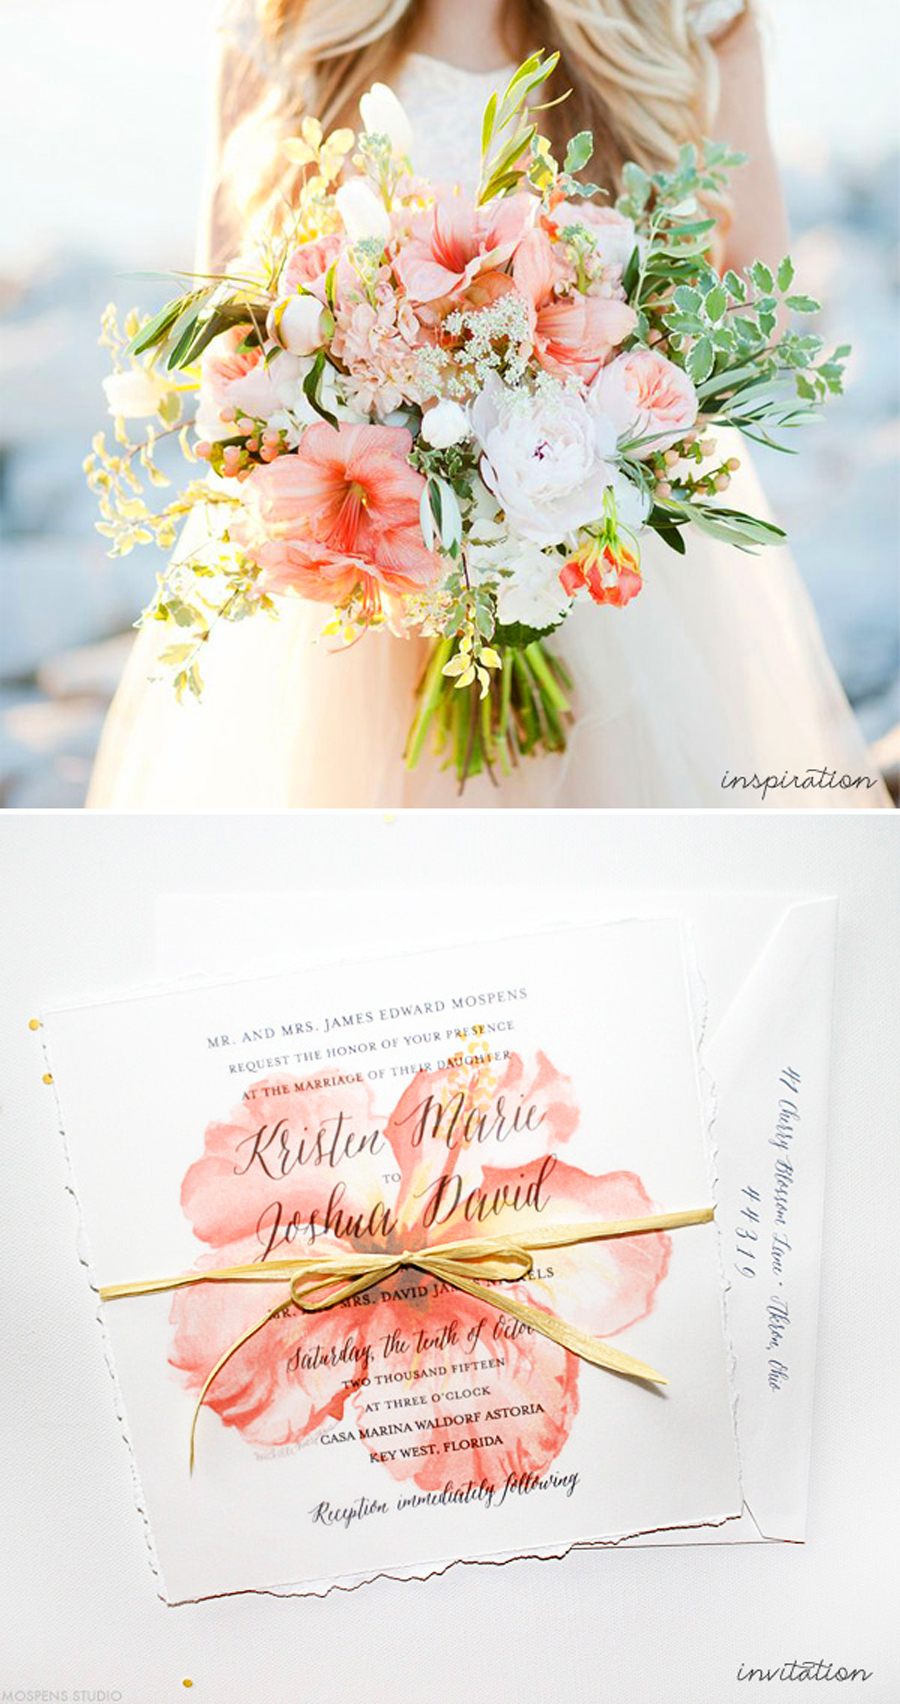 Hand-painted tropical wedding invitations by artist Michelle Mospens. // Watercolor beach wedding invitations and peach floral inspiration - www.mospensstudio.com